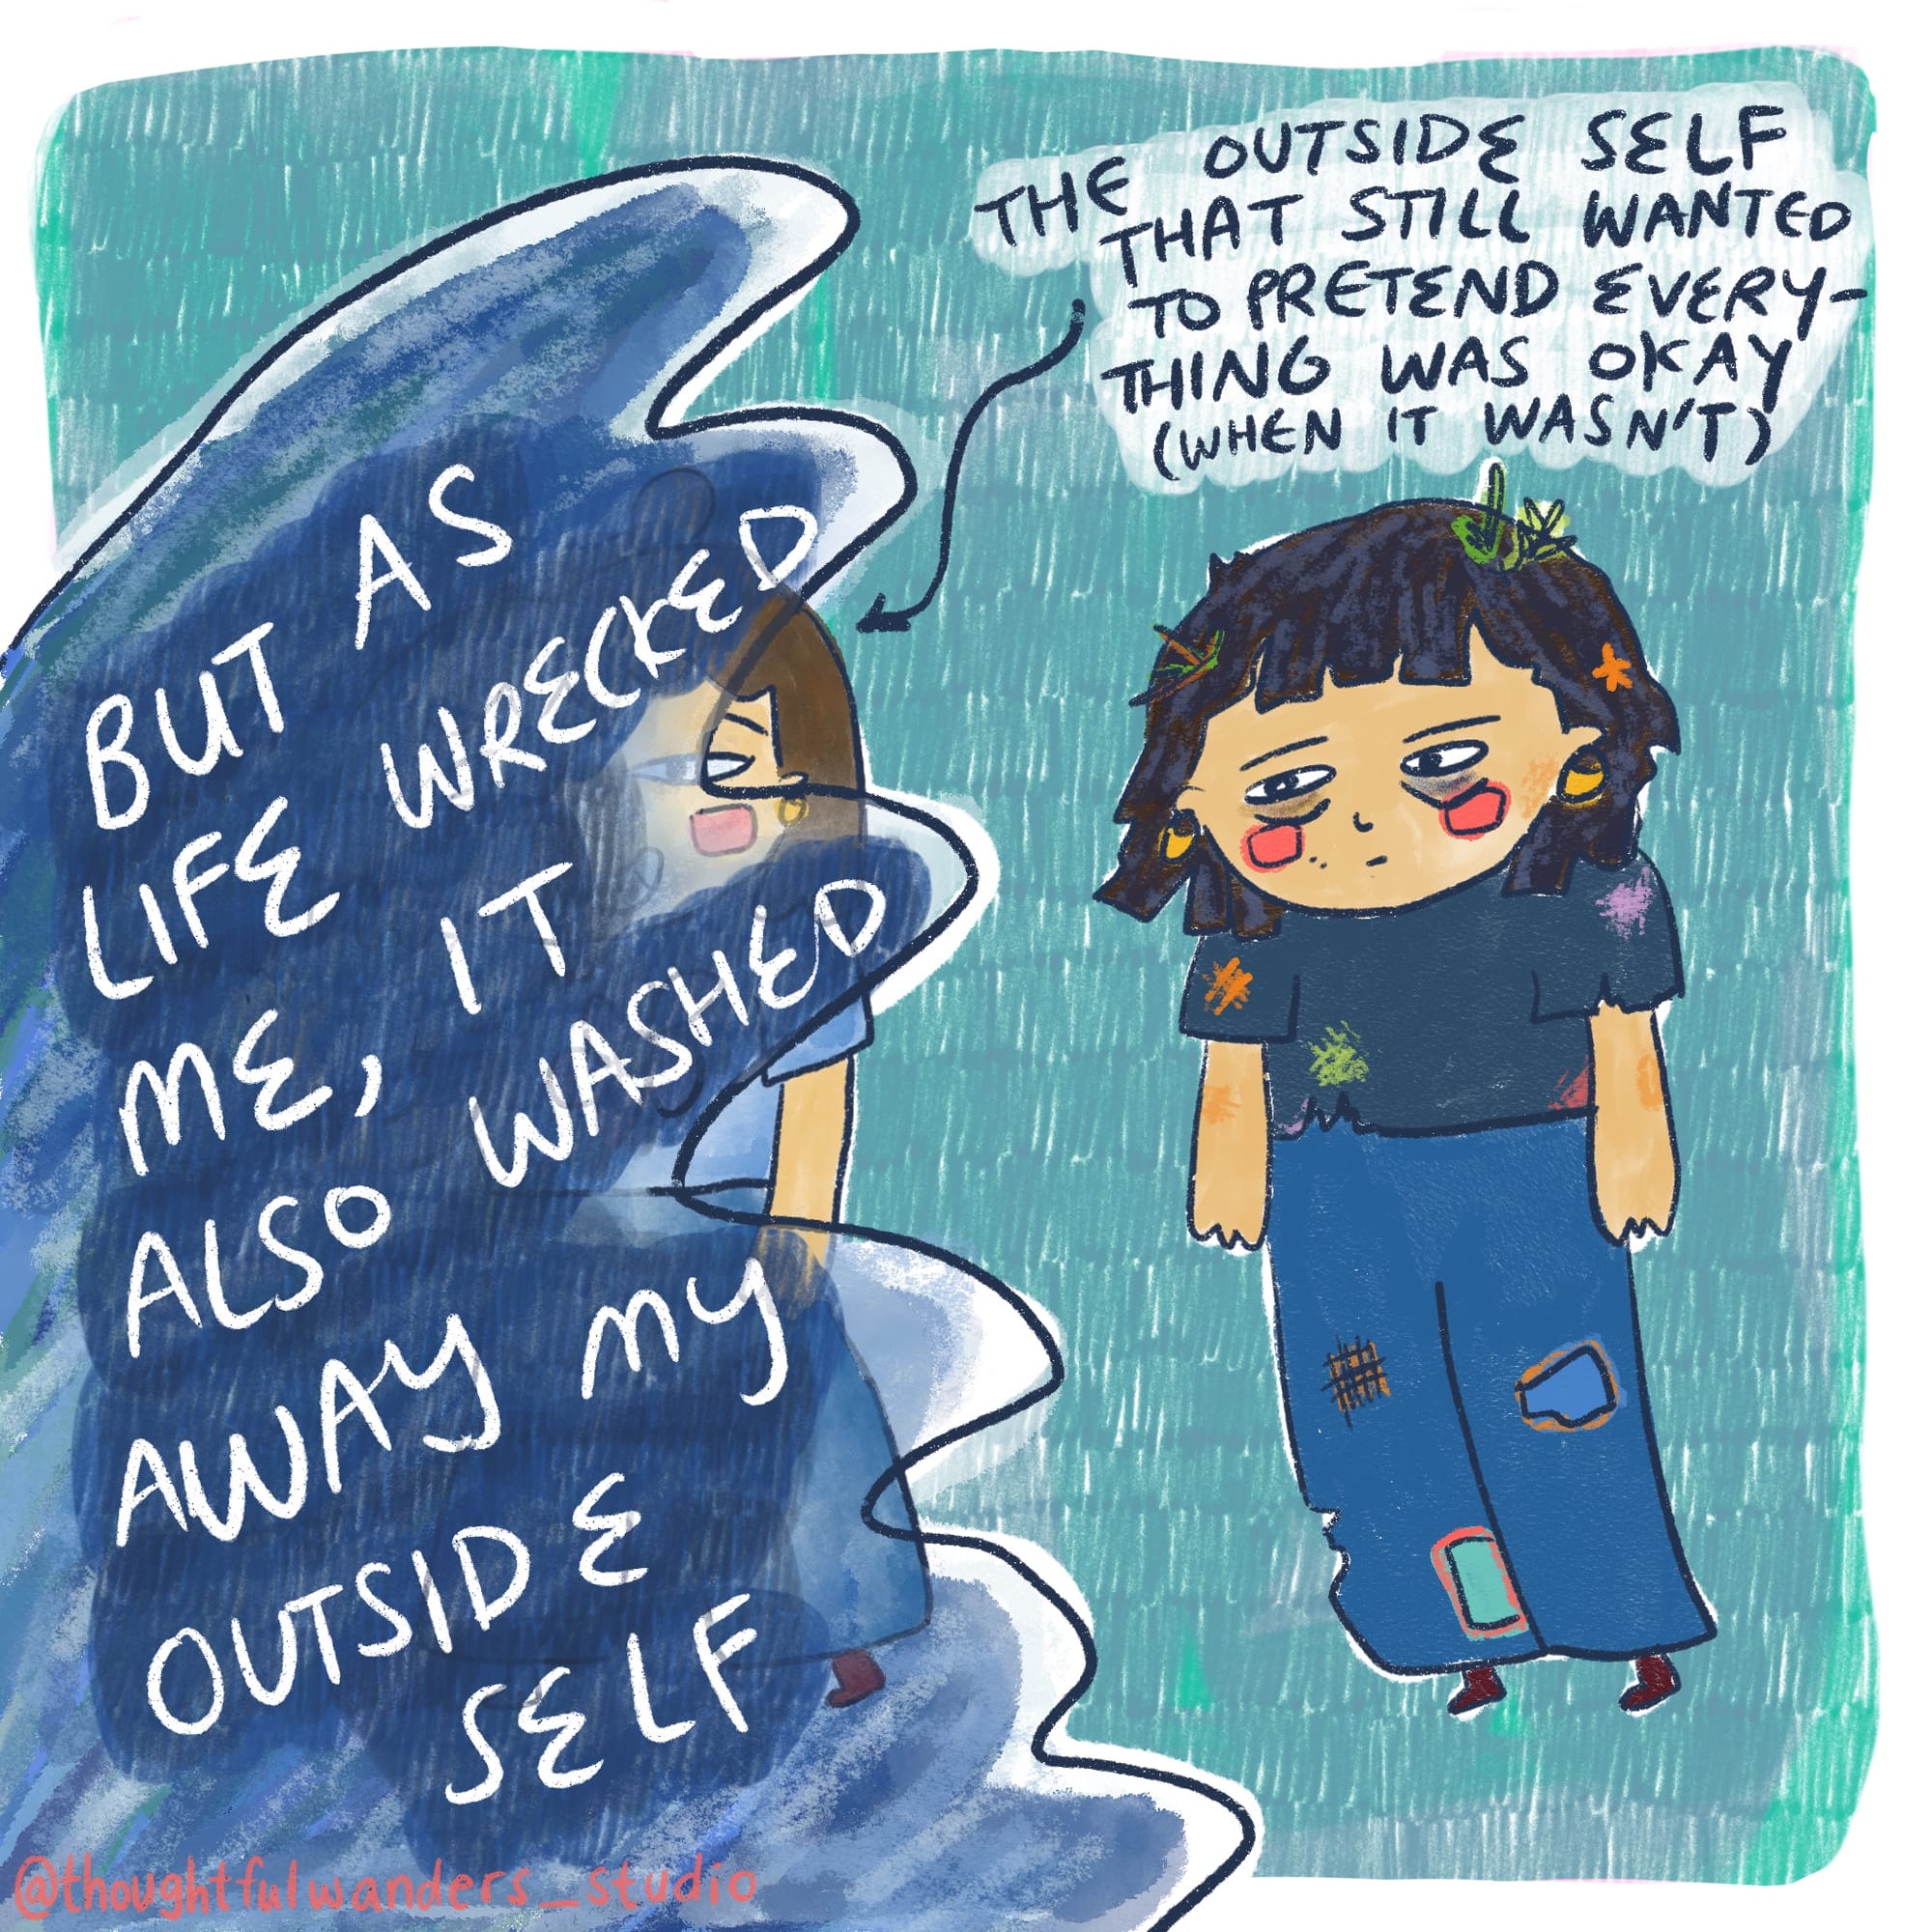 but as life wrecked me, it also washed away my outside self. the outside self that still wanted to pretend everything was okay (when it wasn't)